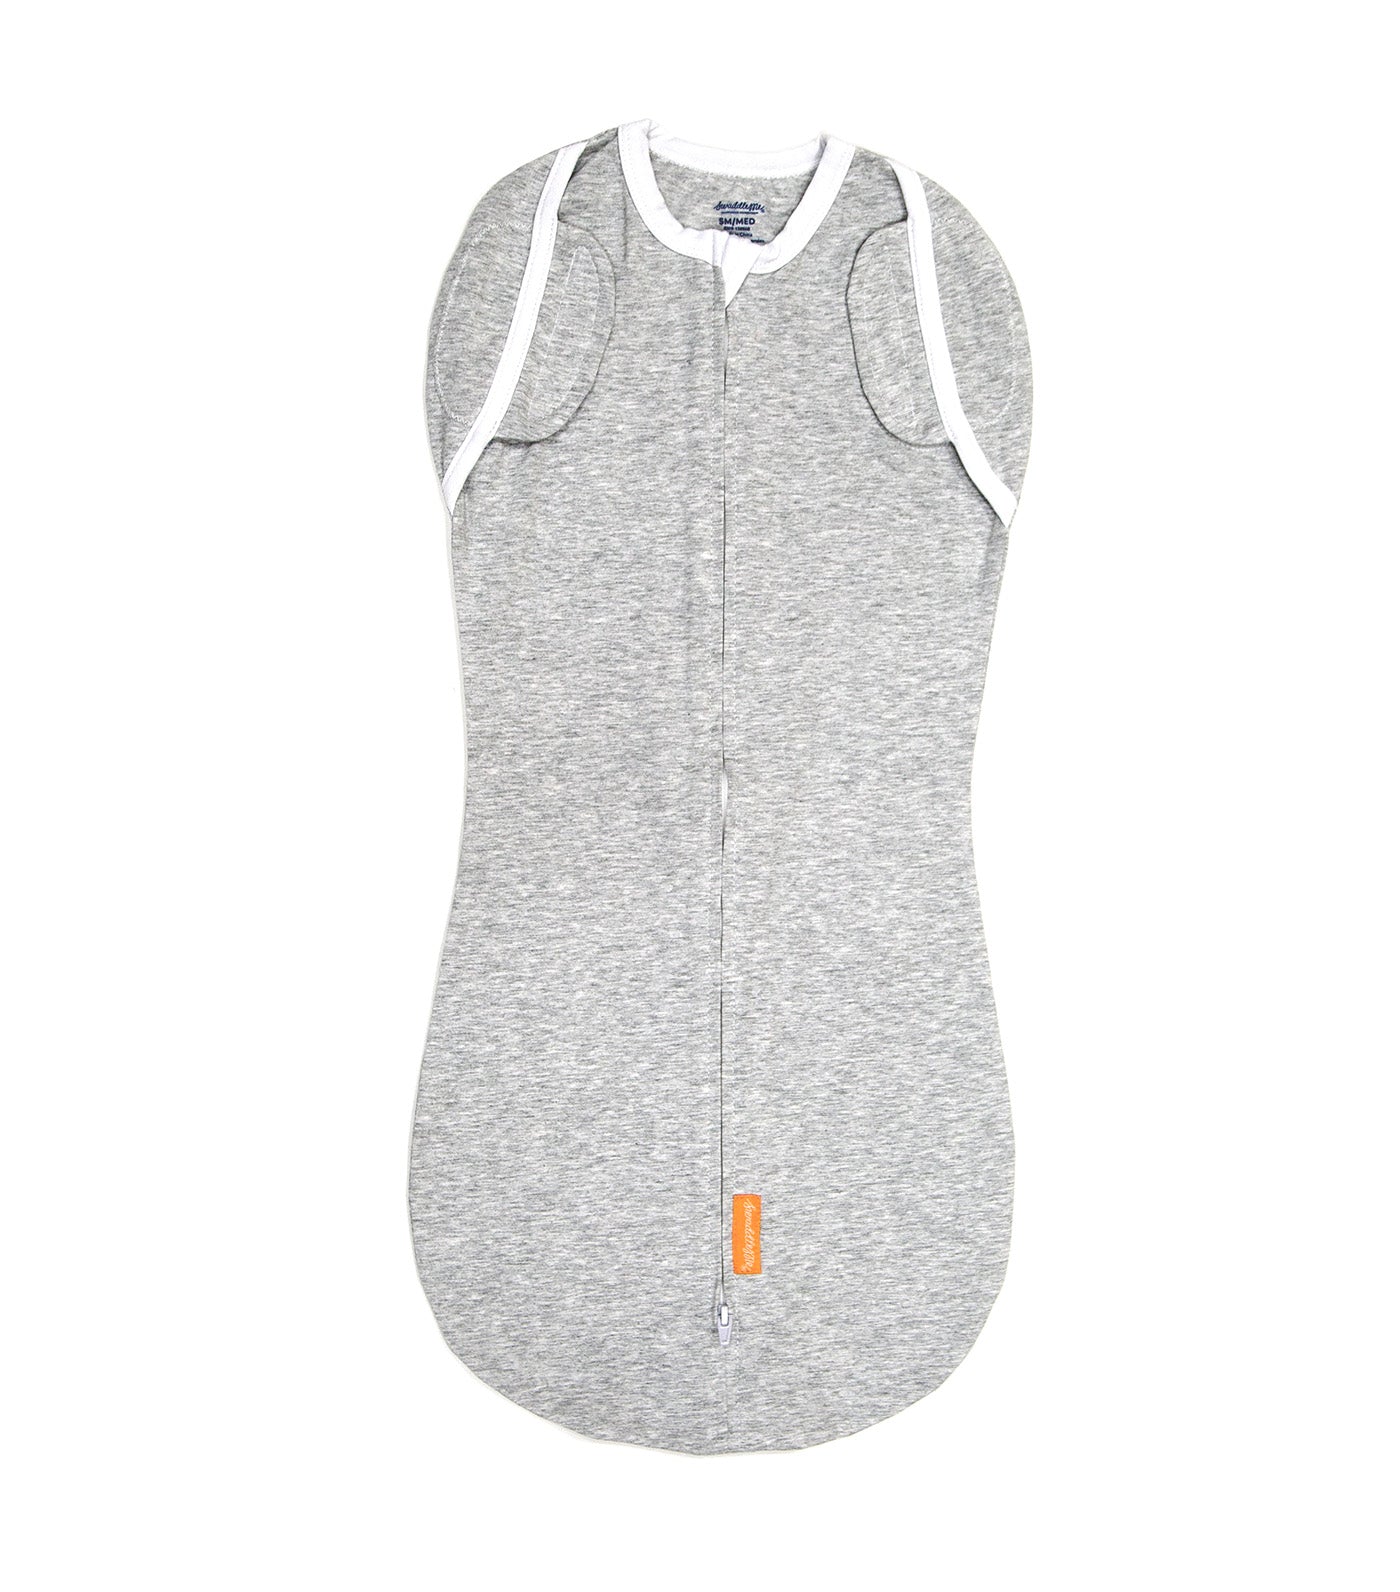 SwaddleMe® Arms Free® Convertible Pod Heathered Gray